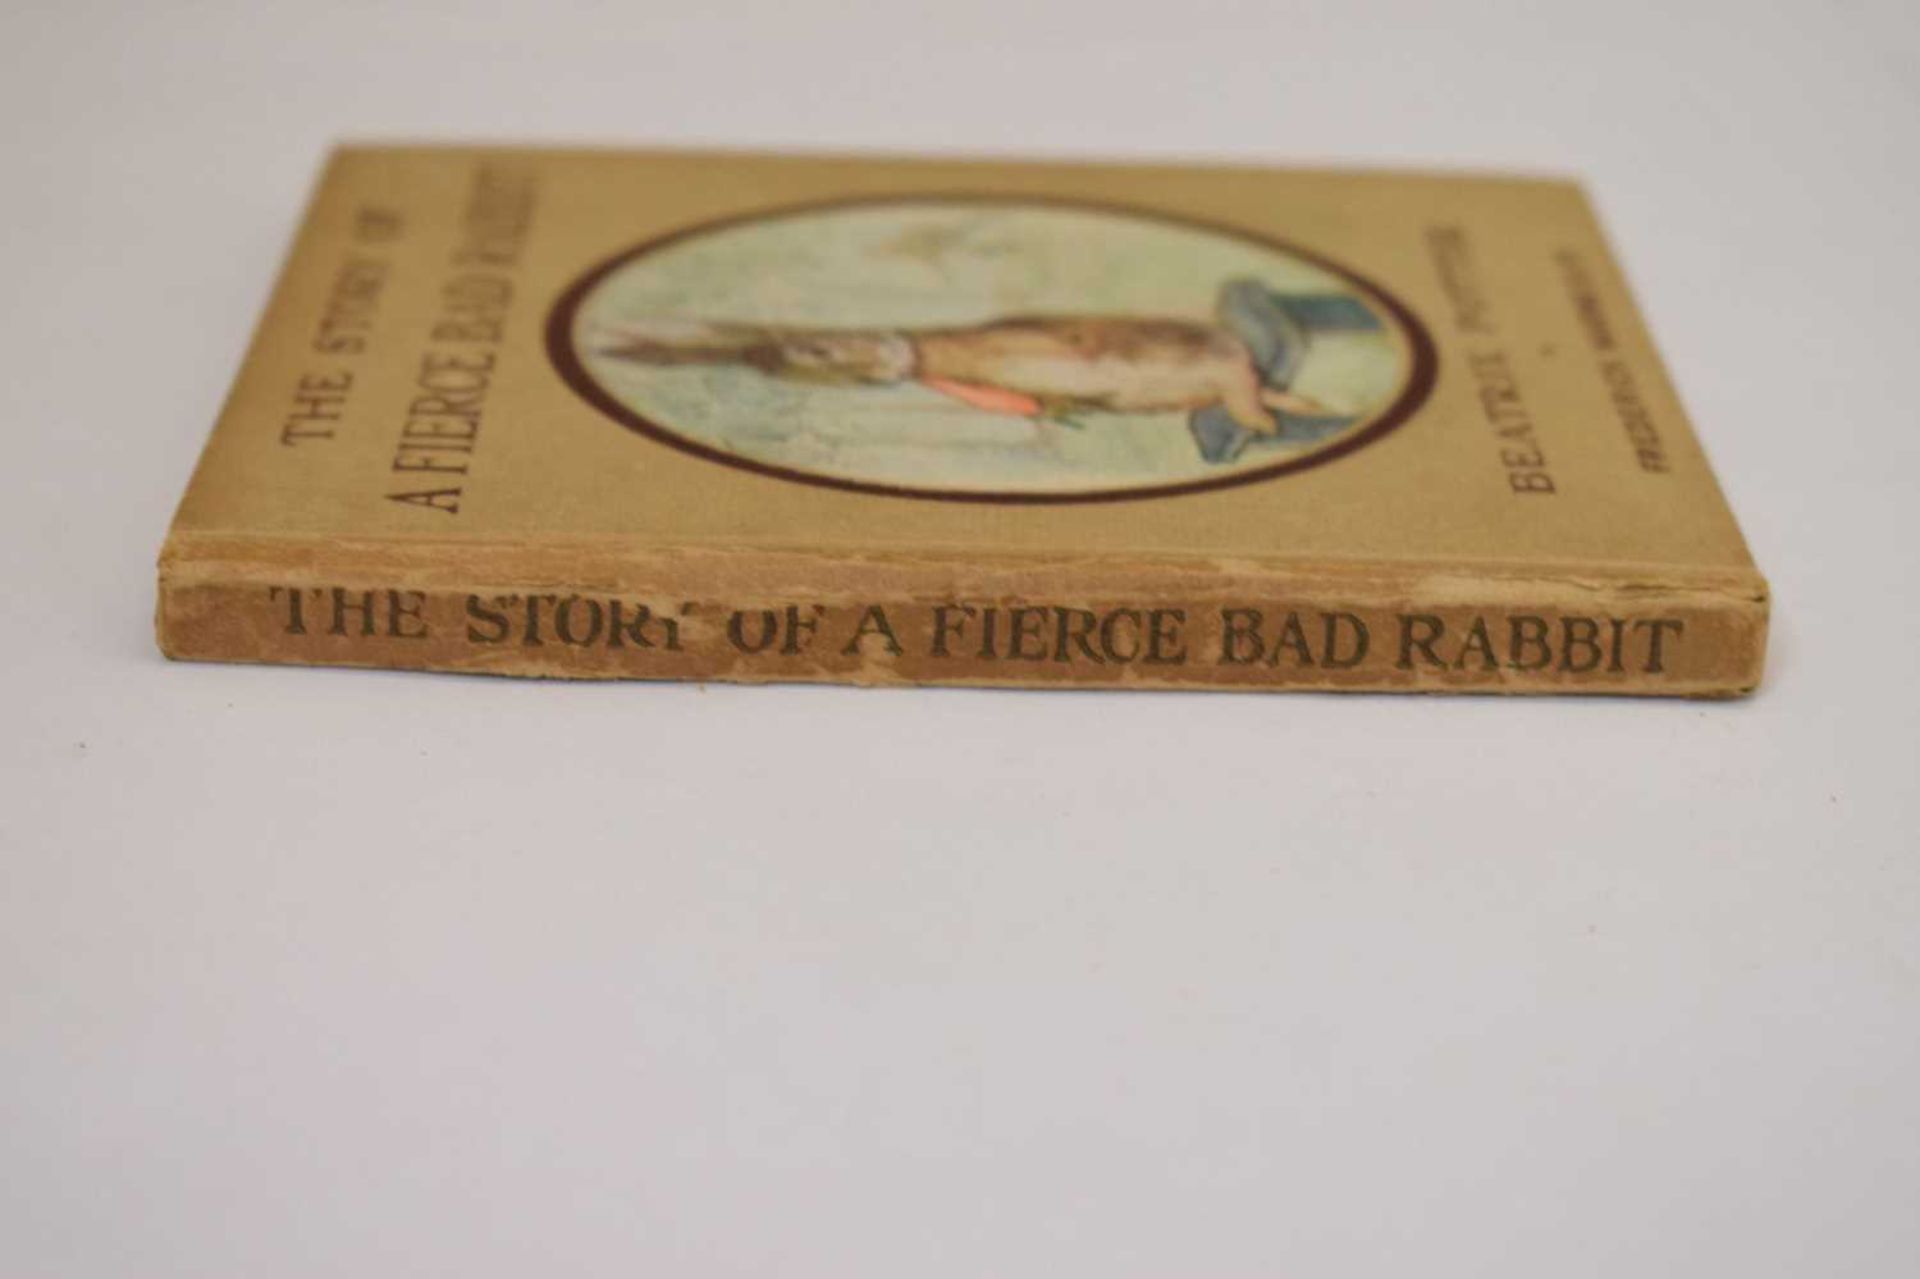 Potter, Beatrix - 'The Story of A Fierce Bad Rabbit' - First Edition - Image 3 of 20